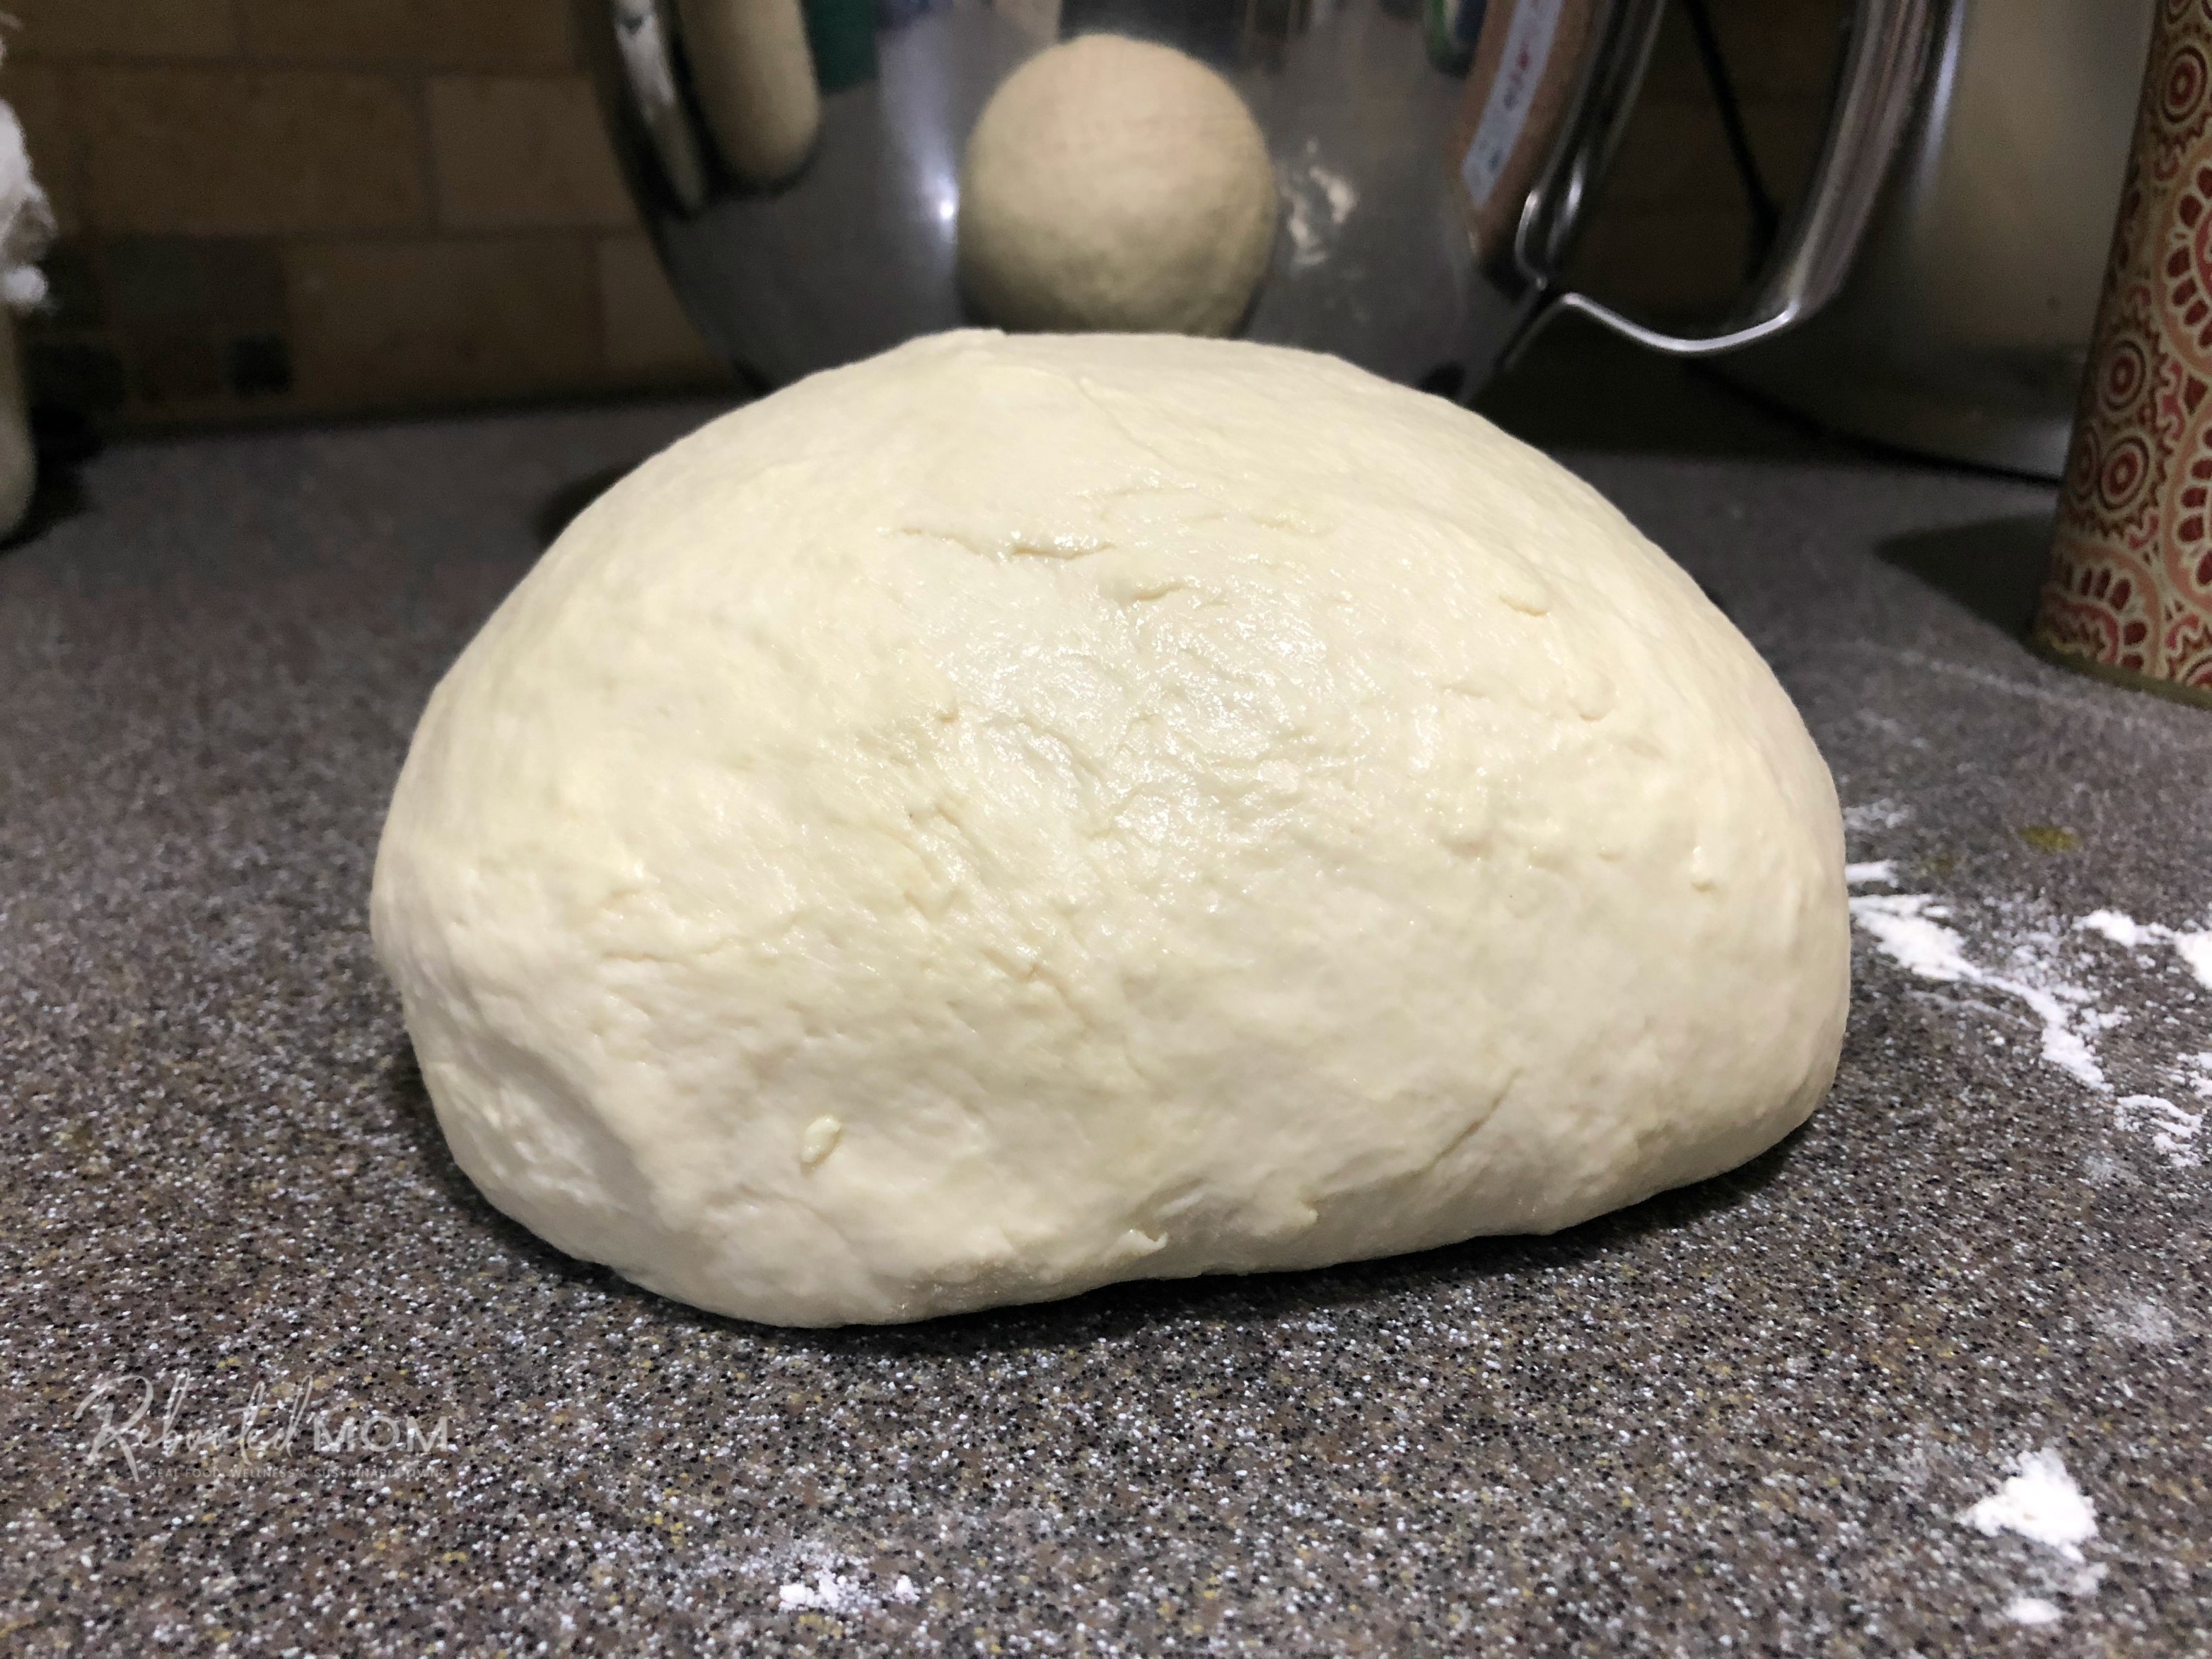 Ball of sourdough before rise \ Easy homemade sourdough bagels you can make at home with your own active sourdough starter. This step by step tutorial makes the most delicious bagels!